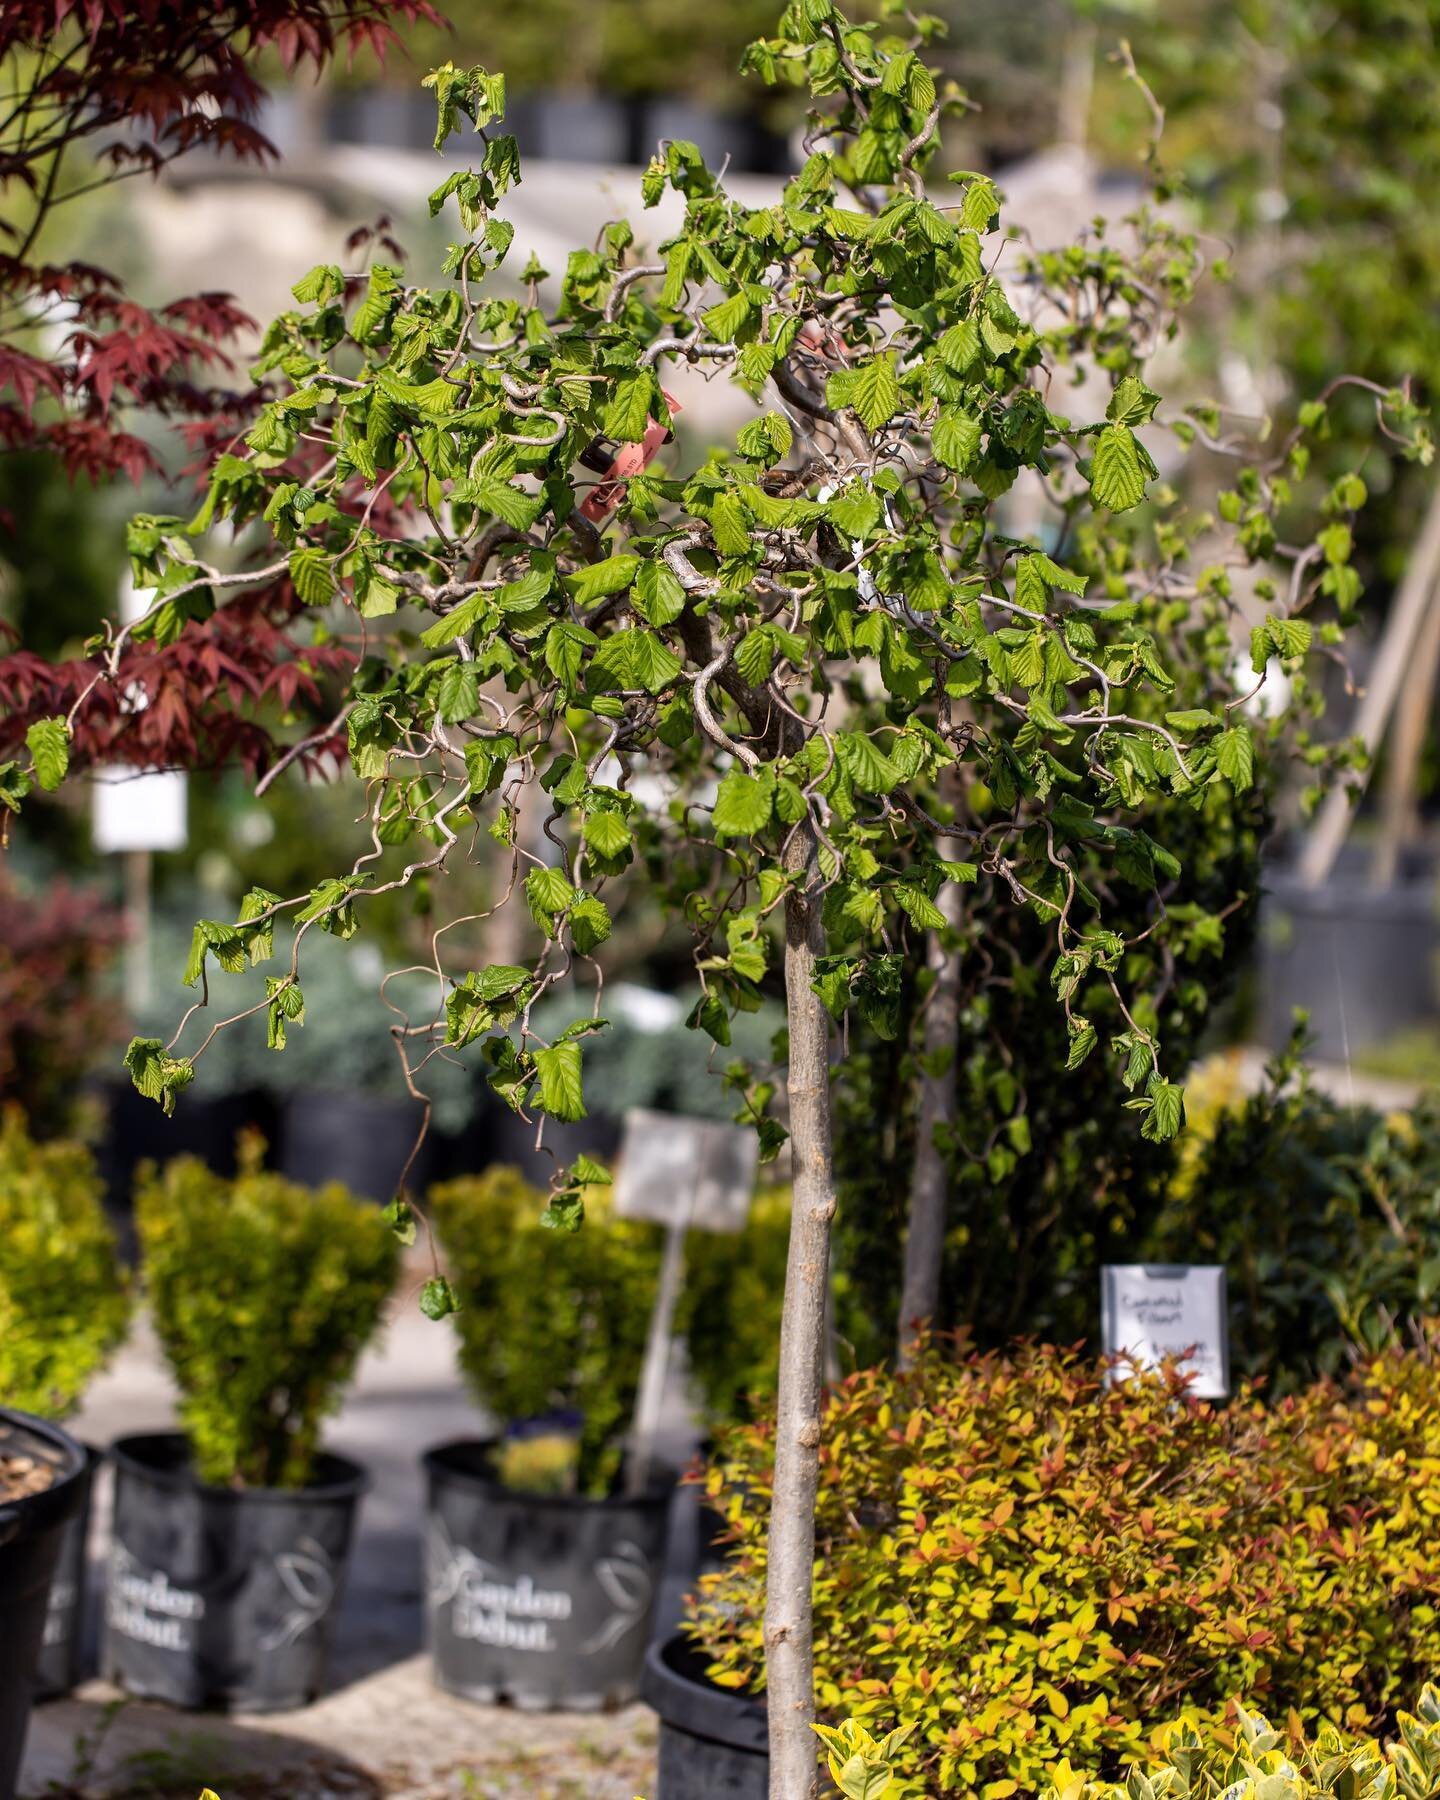 Meet the Contorted Filbert: one of the most asked about trees as people browse the garden center&mdash; and you can see why! This tree grows 8-10ft and features twisted and spiraling branches, twigs and leaves. Noted for its winter beauty, when the l